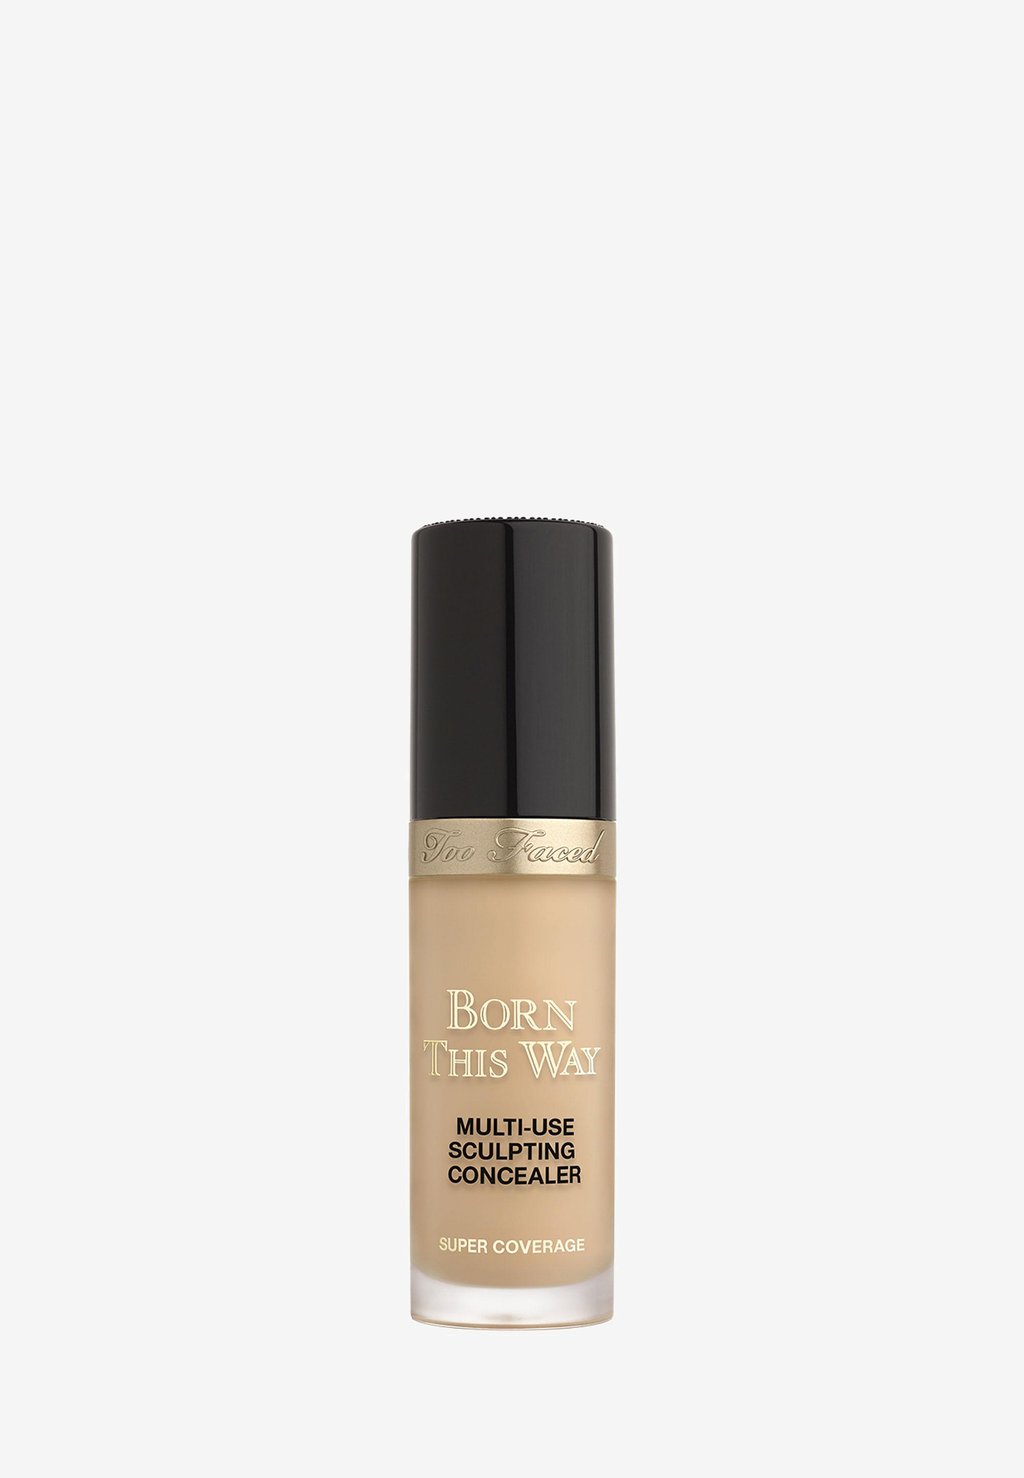 Консилер BORN THIS WAY SUPER COVERAGE CONCEALER Too Faced, цвет warm beige